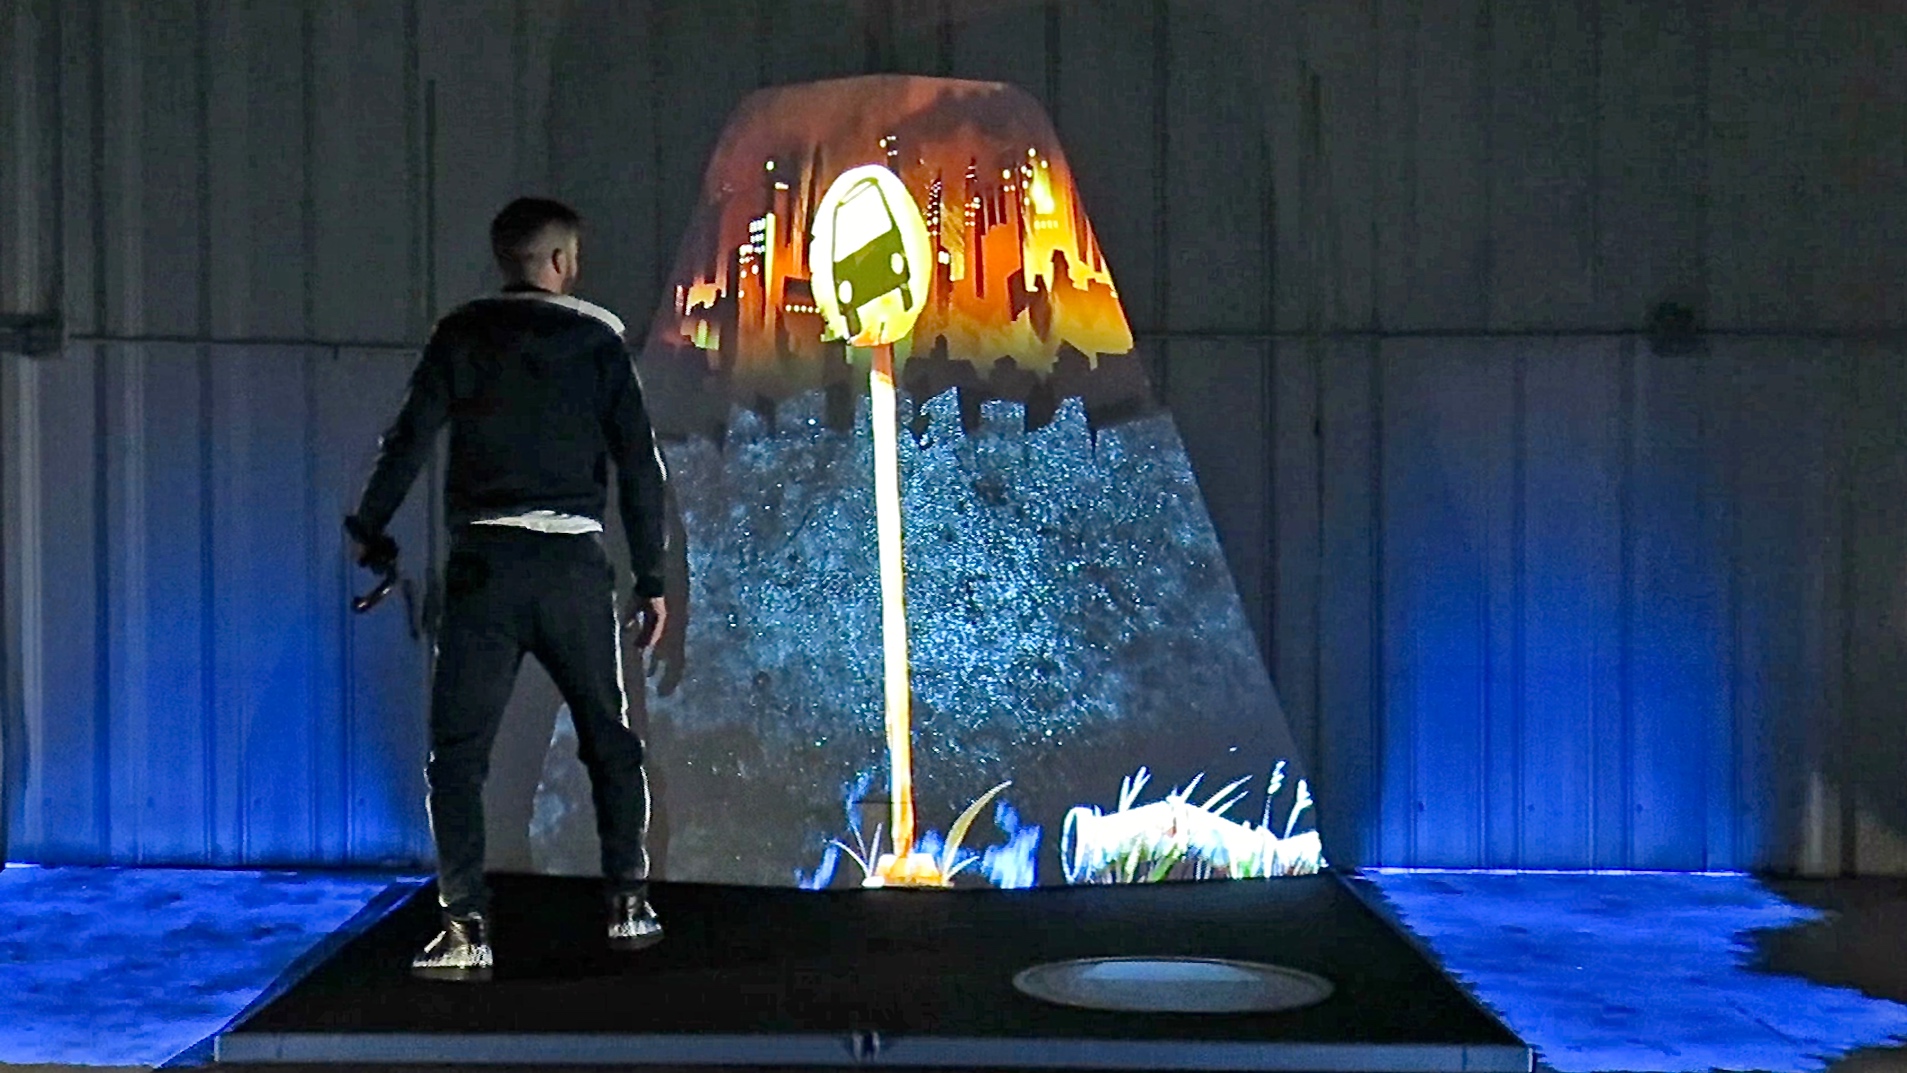 giant pop-up book video mapping